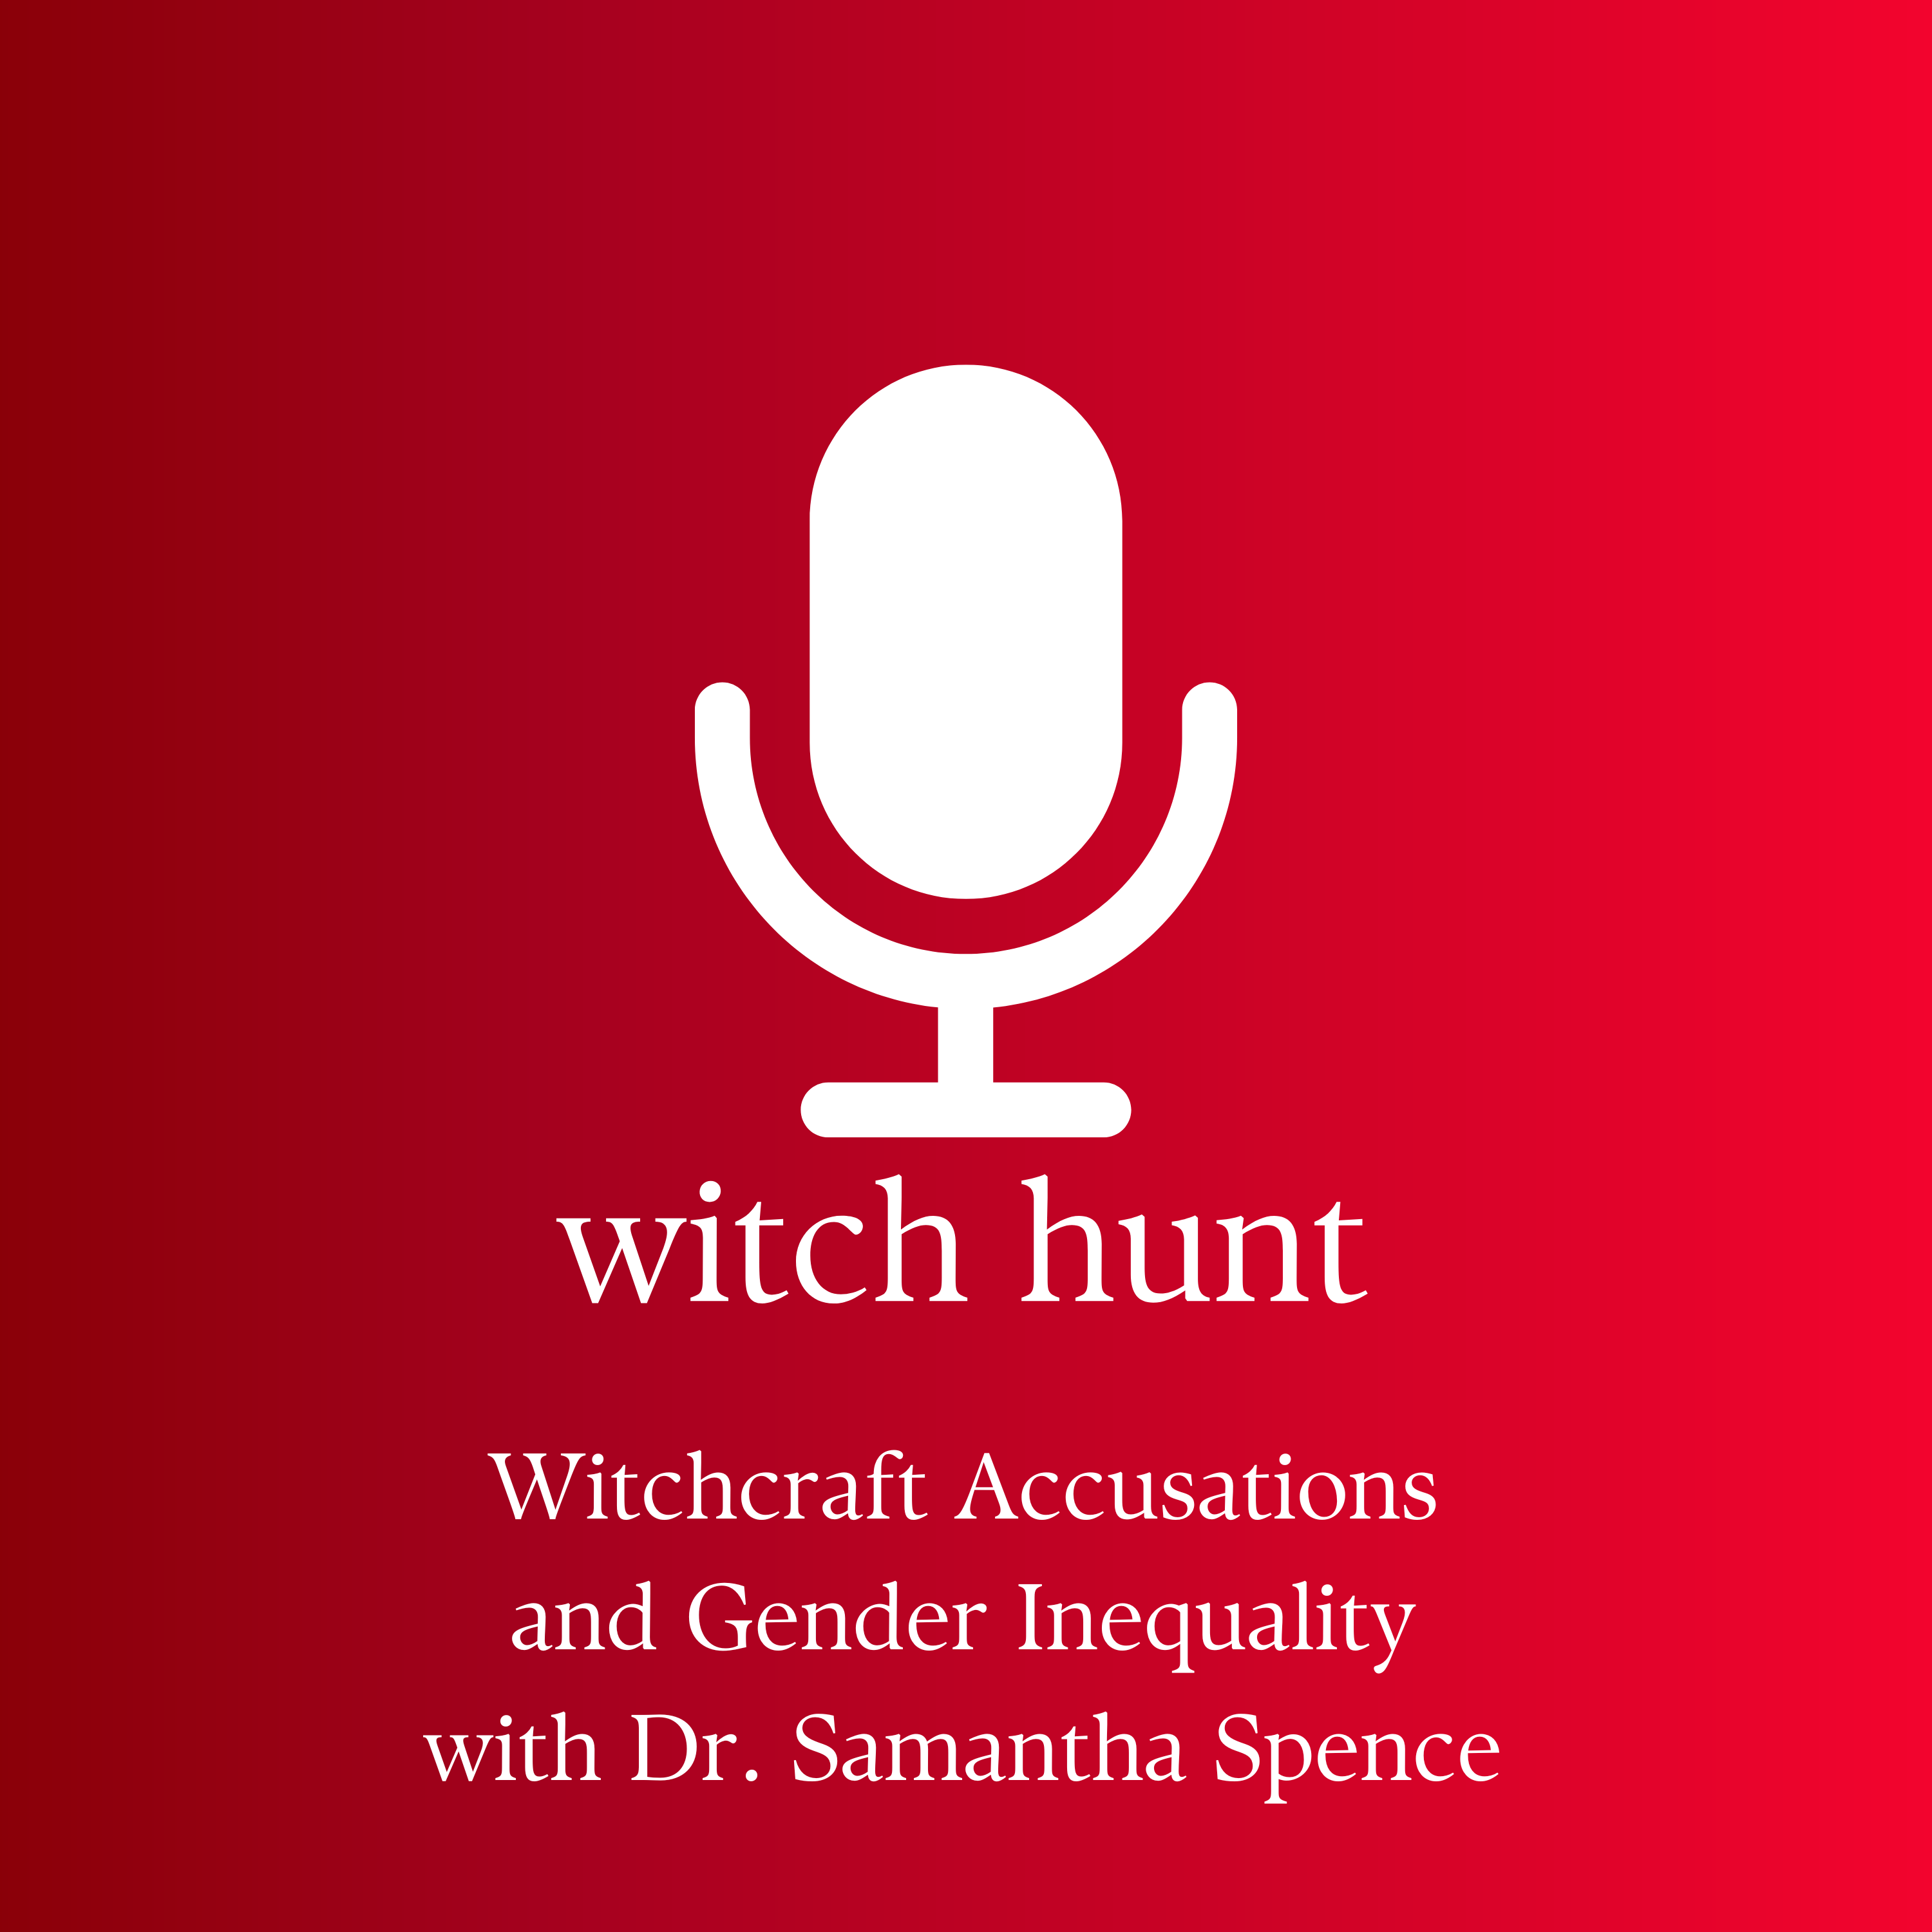 Podcast Episode: Witchcraft Accusations and Gender Inequality with Dr. Samantha Spence